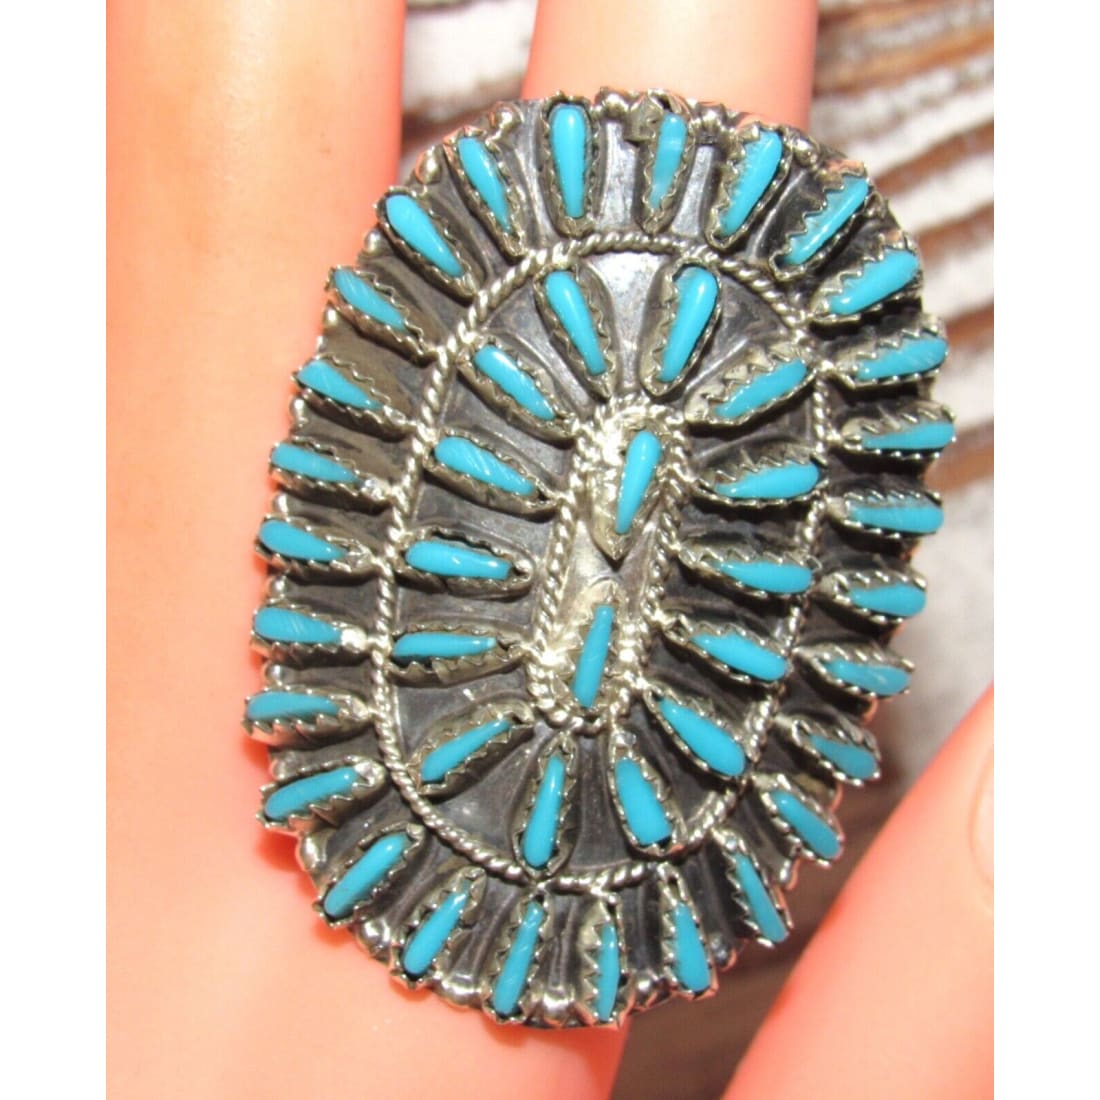 VTG Navajo Turquoise Cluster Ring Sz 9.5 Sterling Silver 